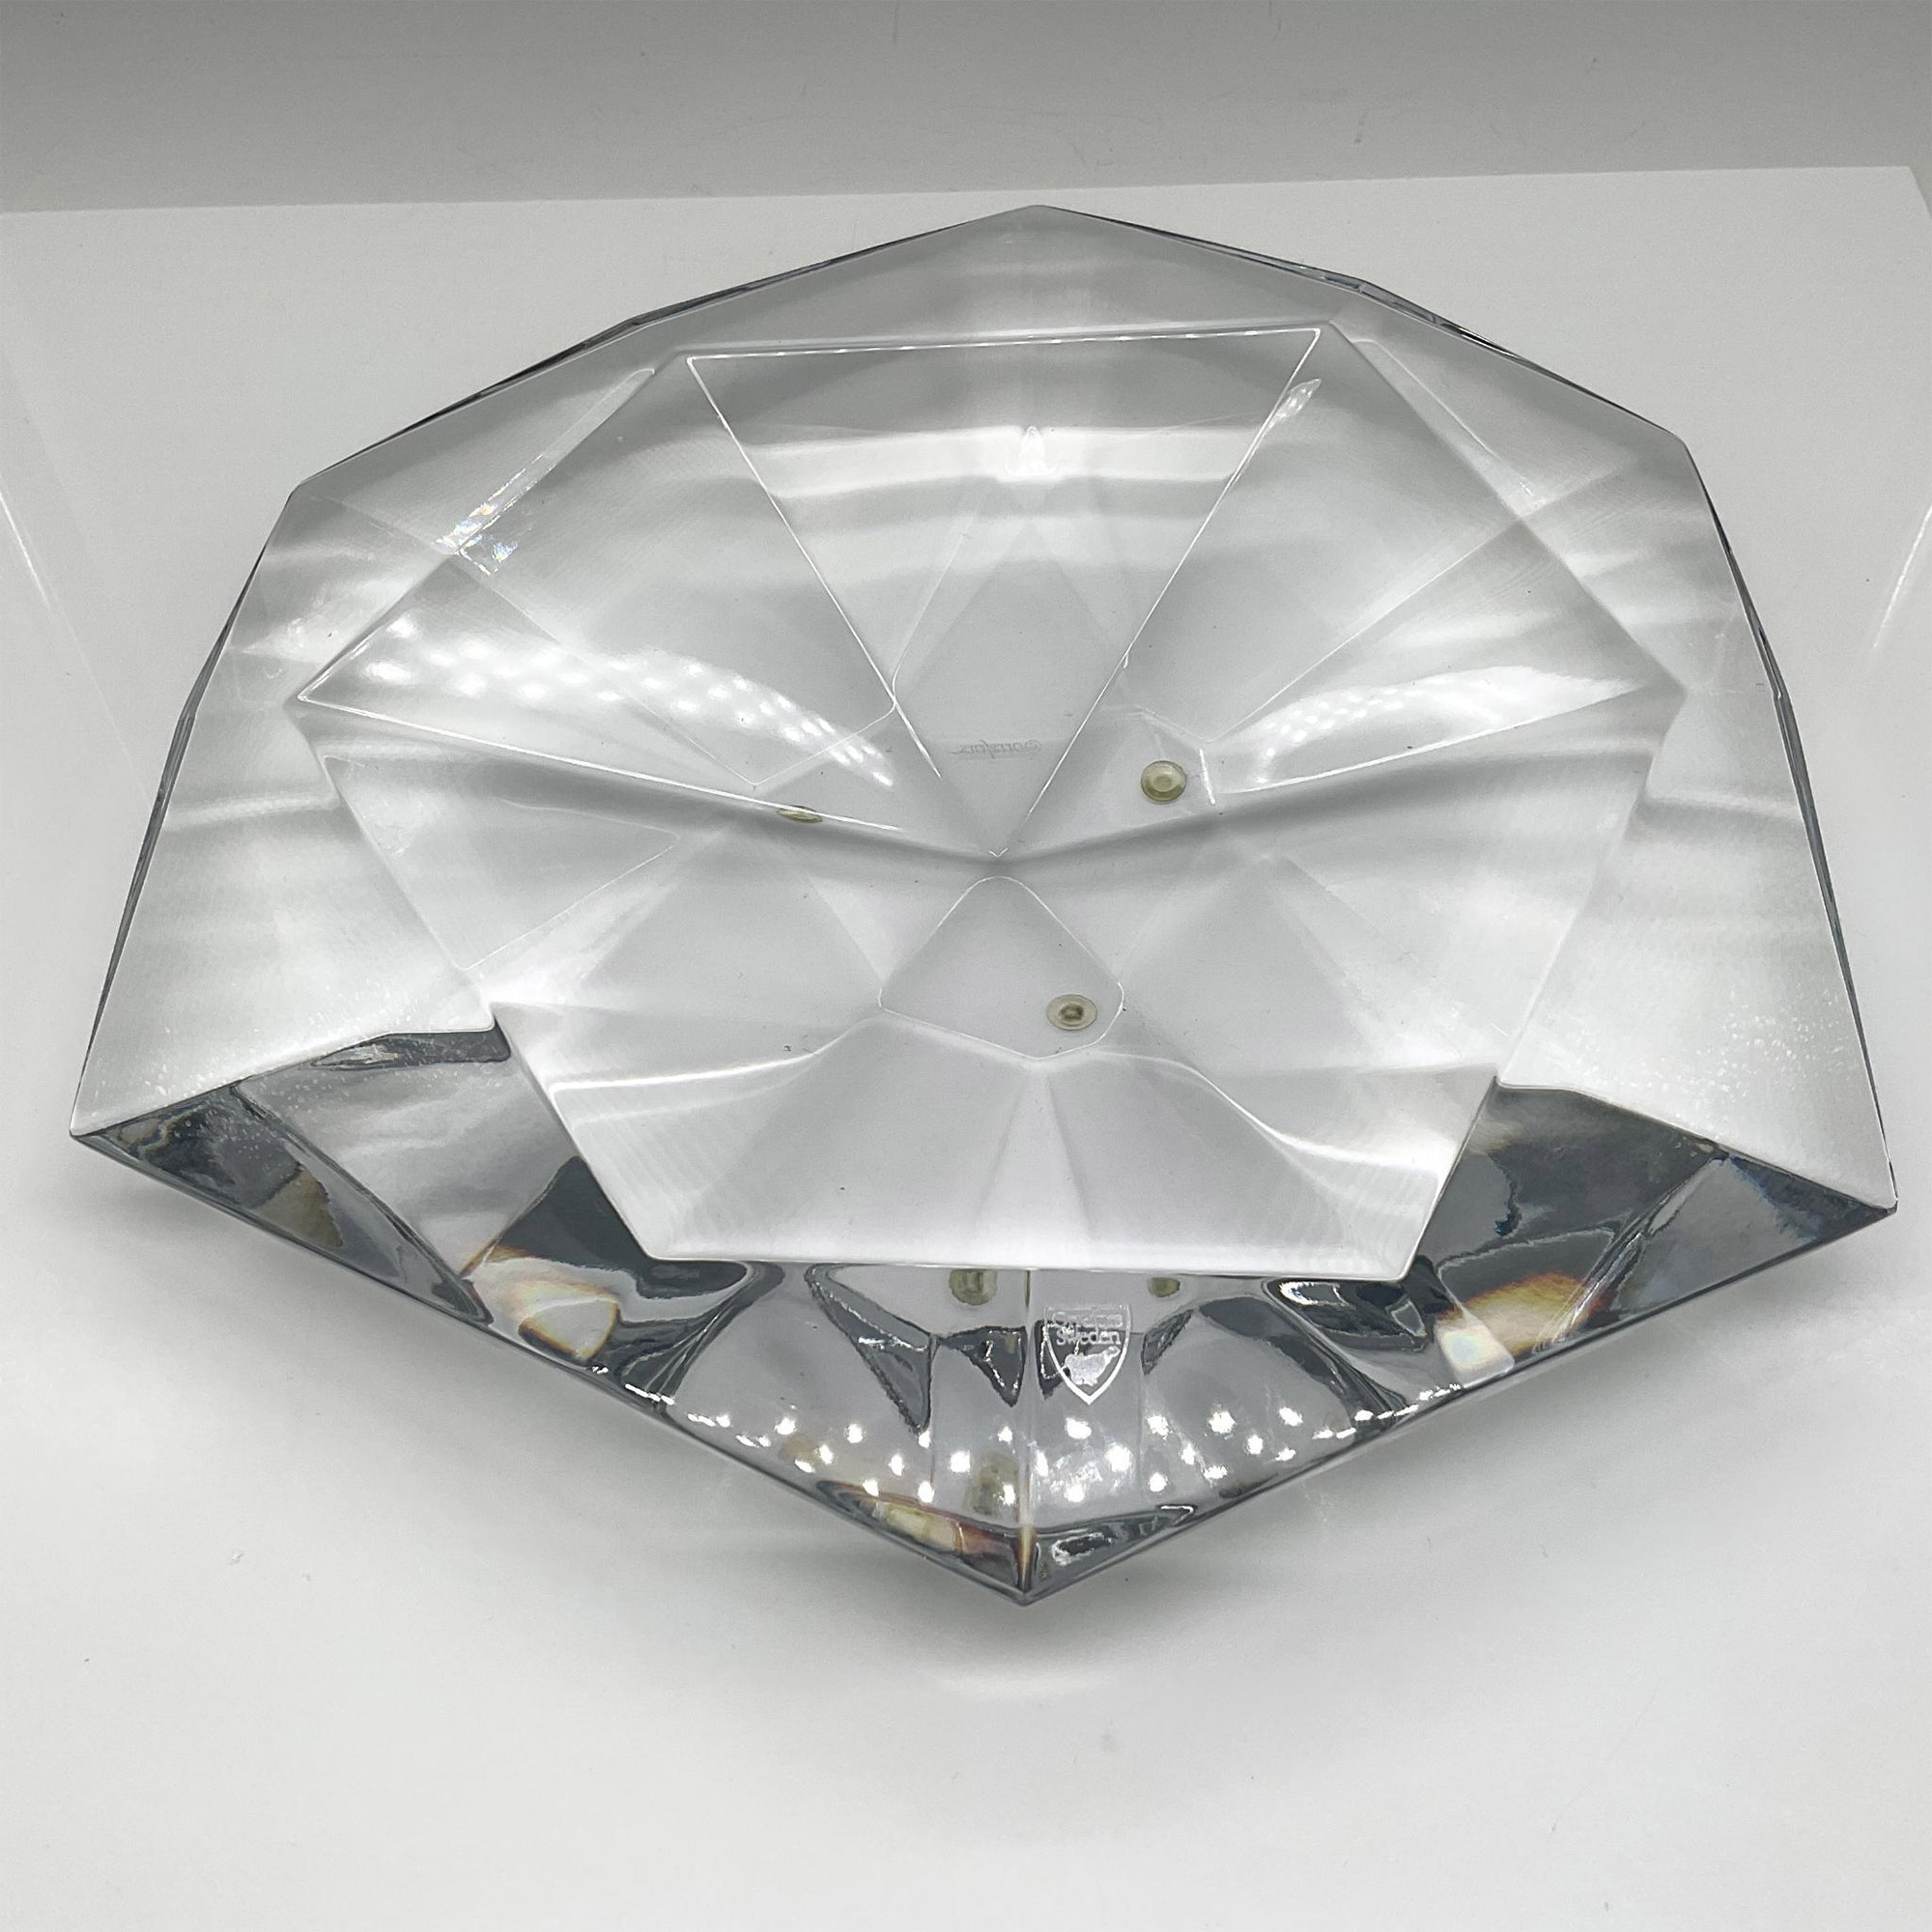 Orrefors Crystal Centerpiece Bowl - Image 2 of 3